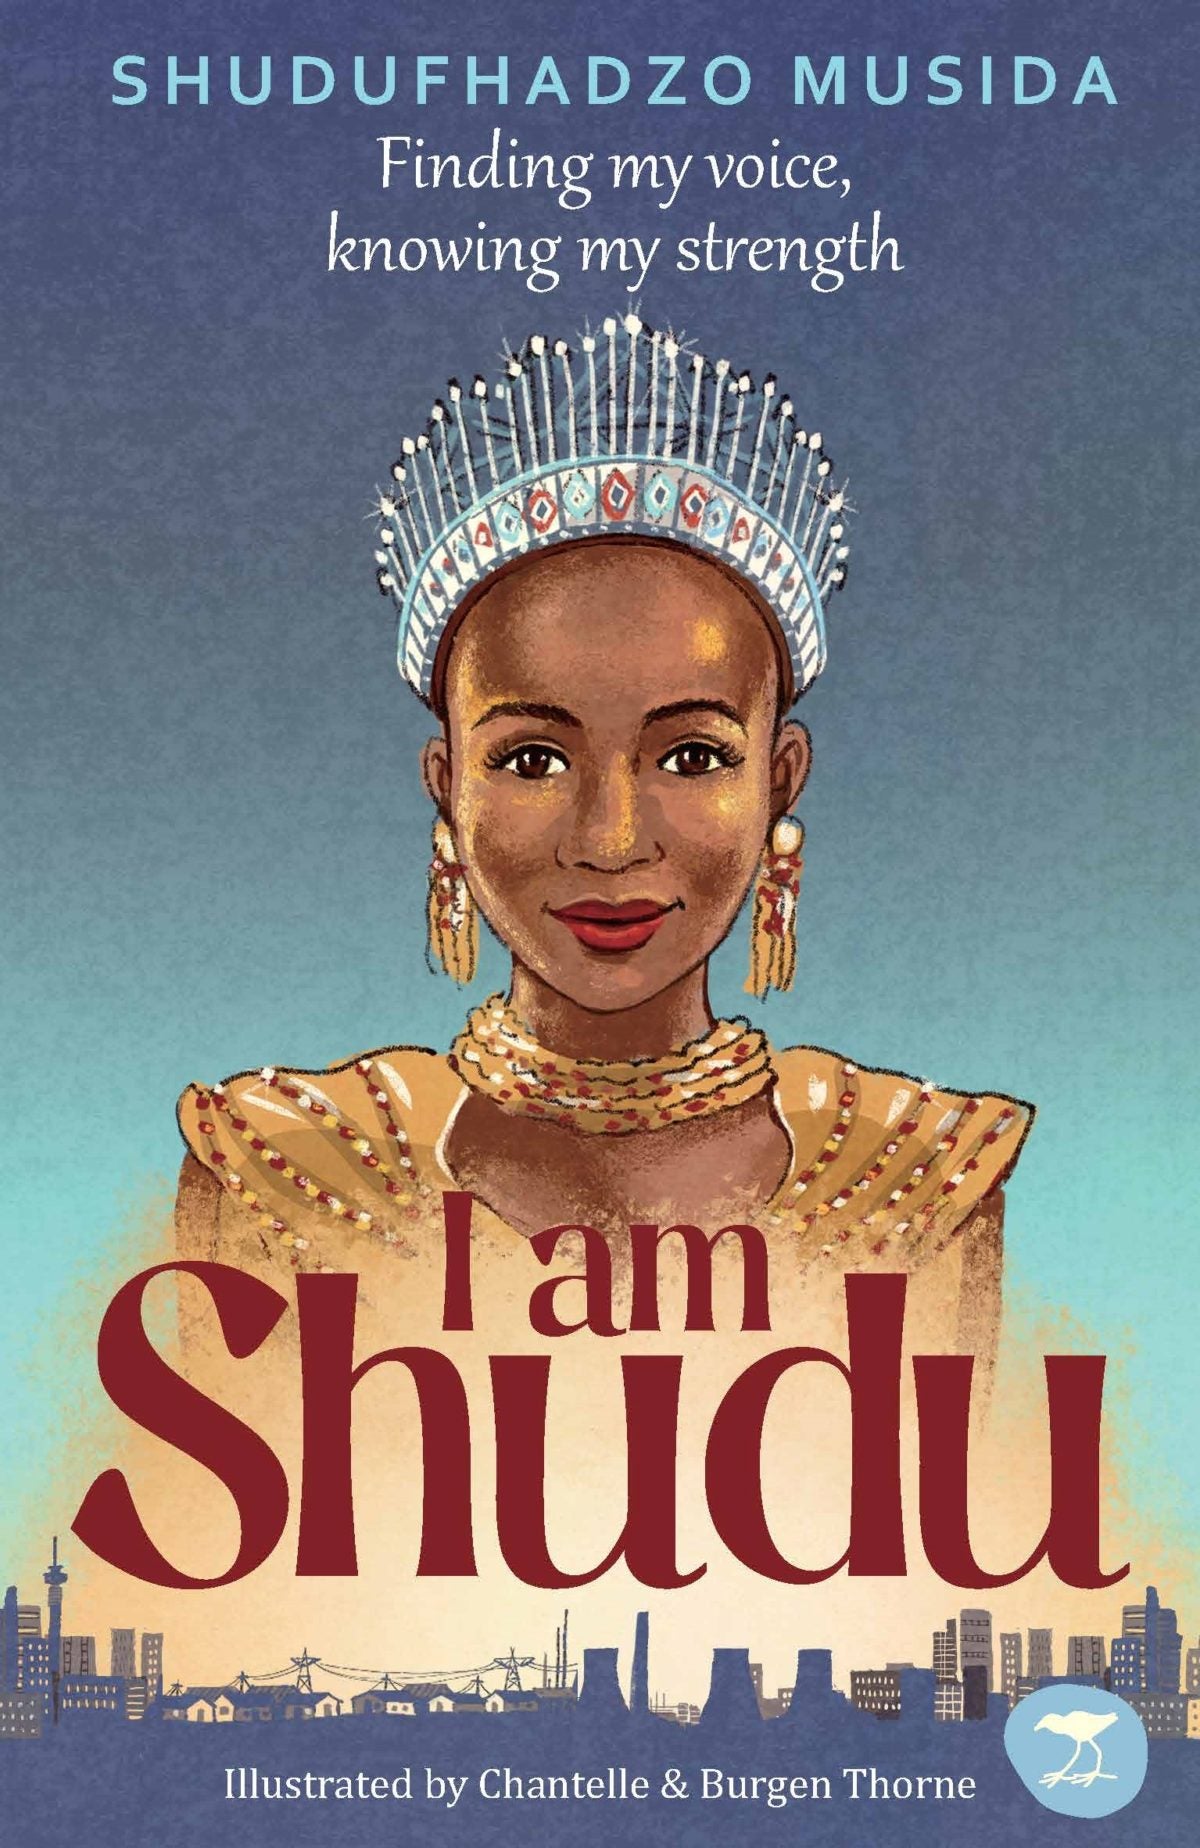 I am Shudu: Finding my Voice, Knowing my Strength